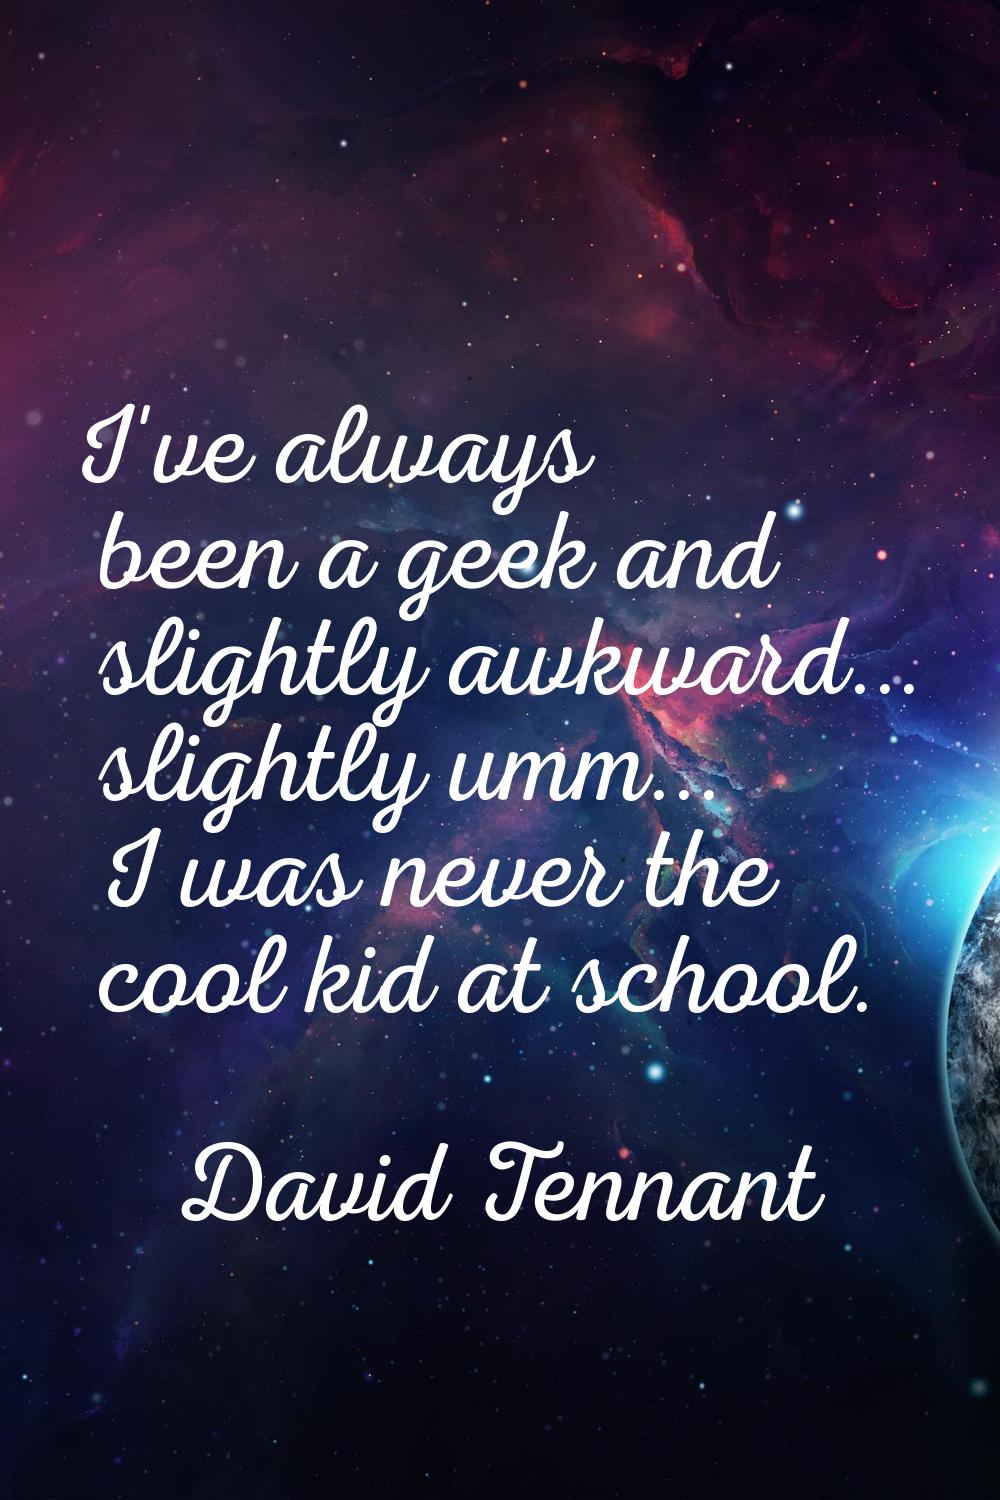 I've always been a geek and slightly awkward... slightly umm... I was never the cool kid at school.